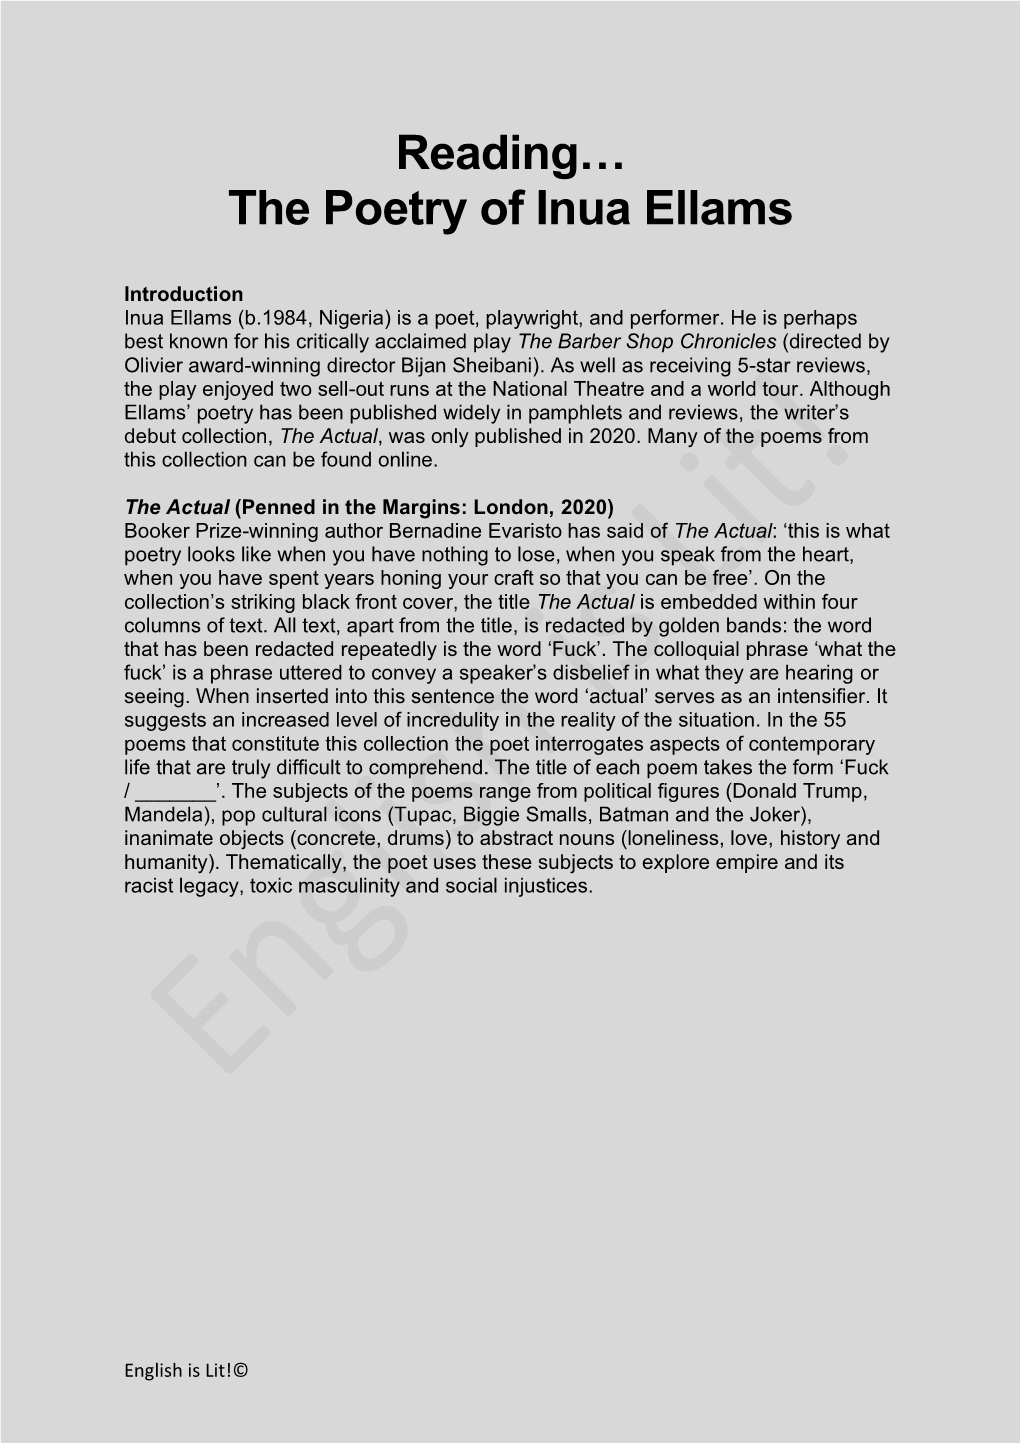 The Poetry of Inua Ellams